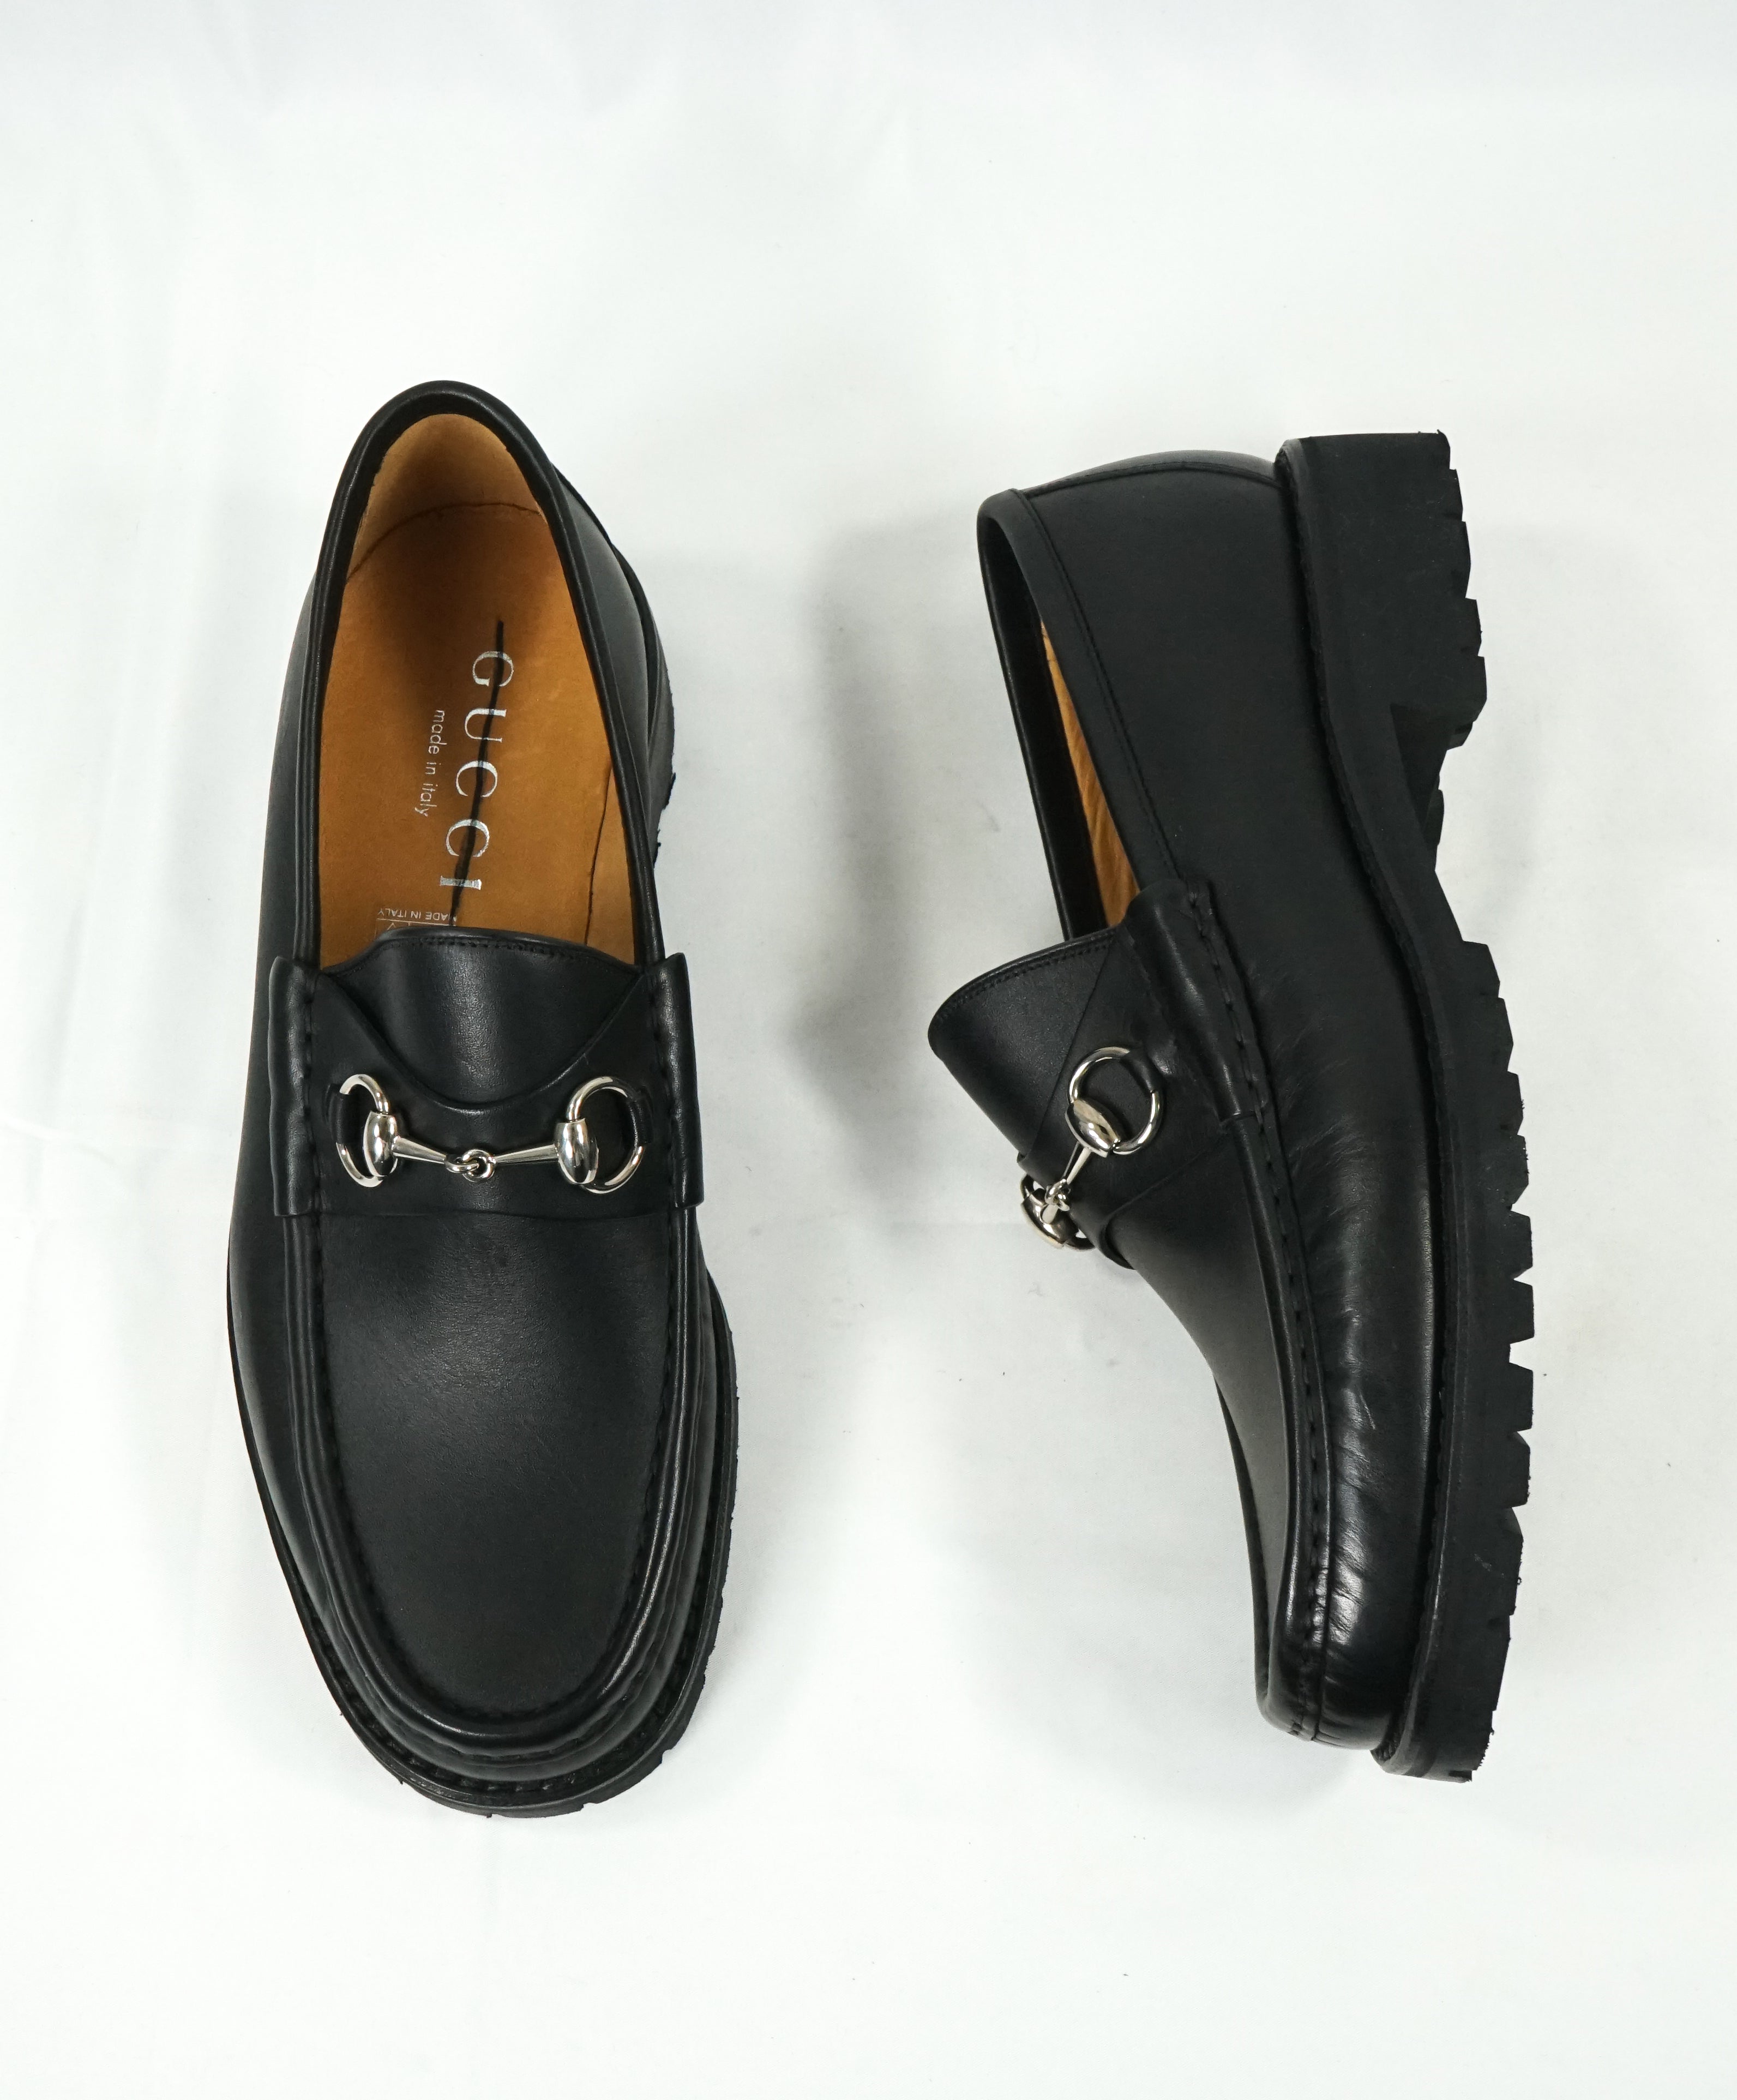 GUCCI - Horse-bit Lug Sole Loafers Black Iconic Style - 10 – Luxe Hanger